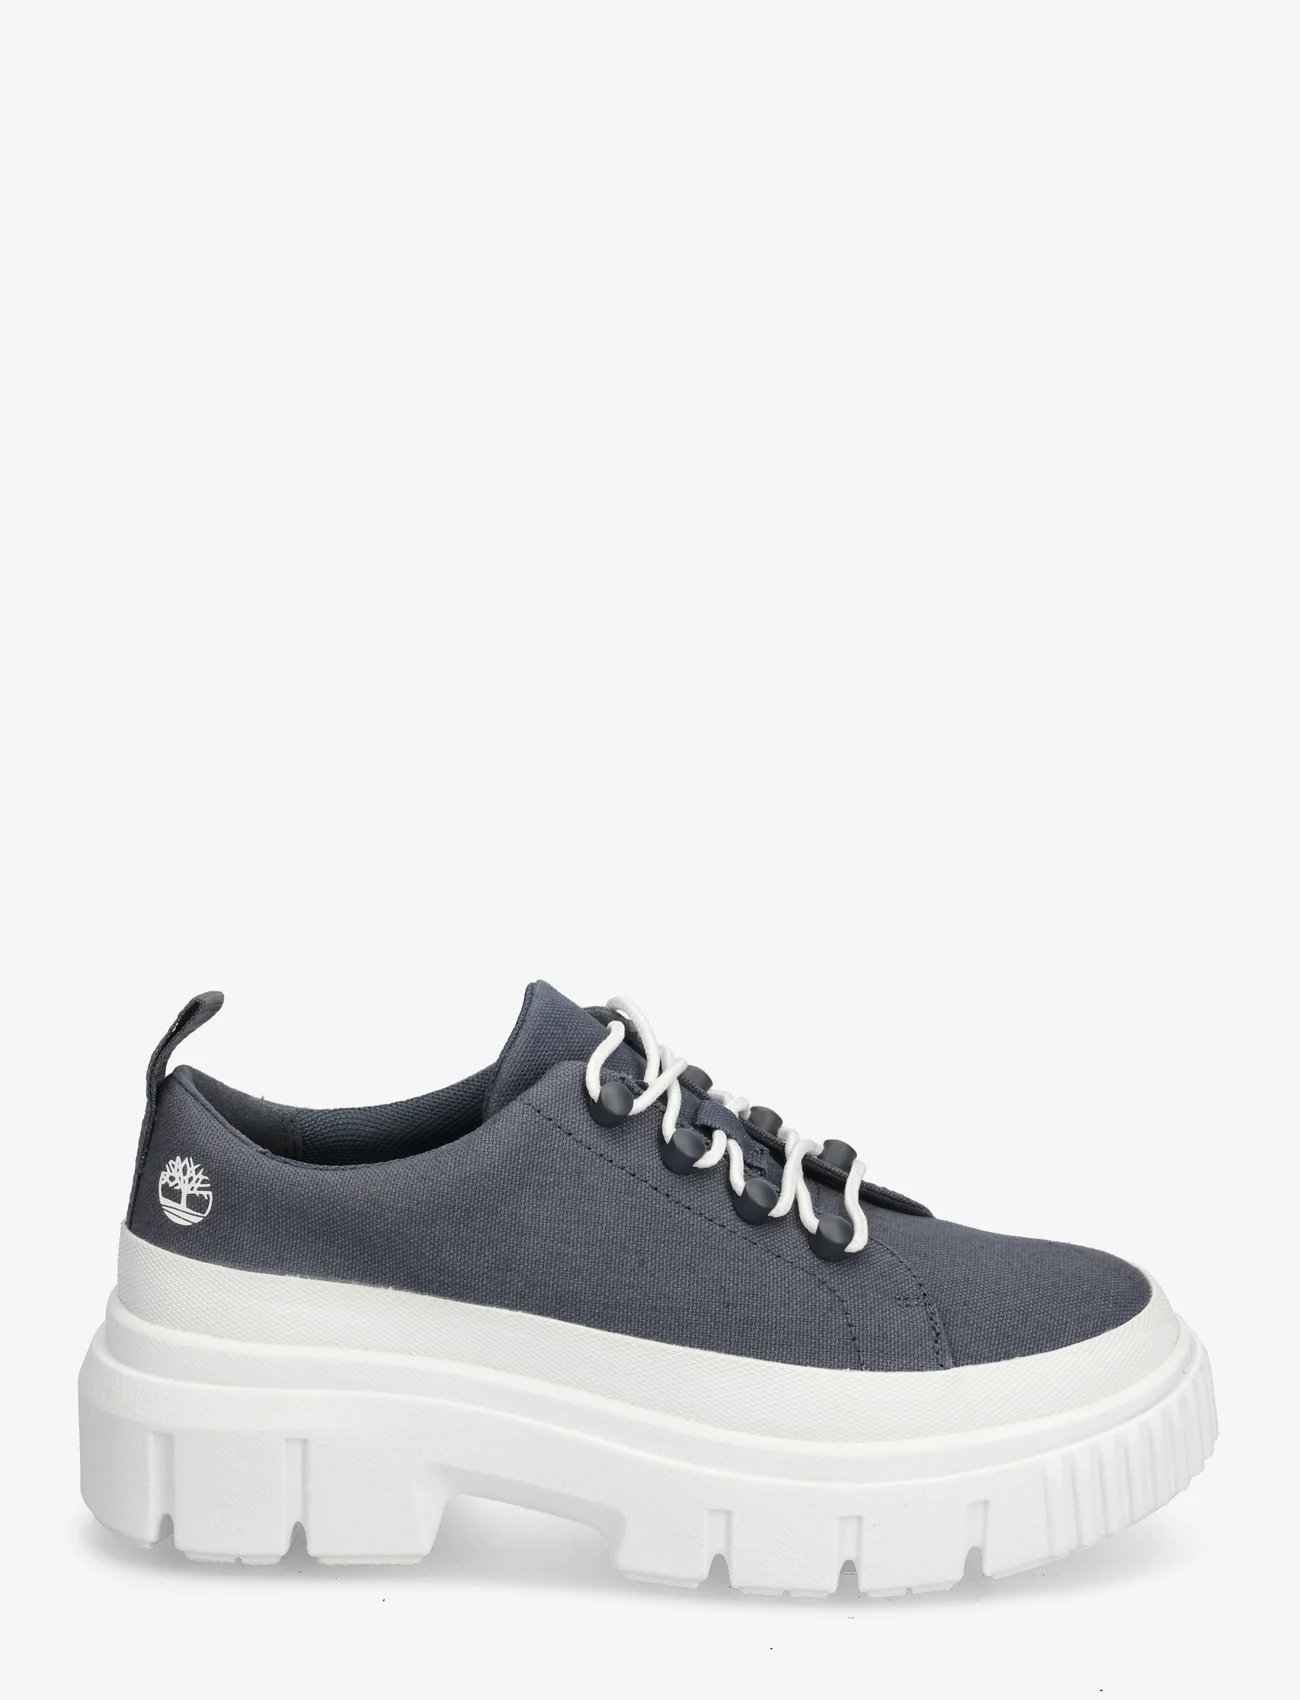 Timberland - Greyfield LACE UP SHOE DARK BLUE CANVAS - sneakers med lavt skaft - dark blue canvas - 1